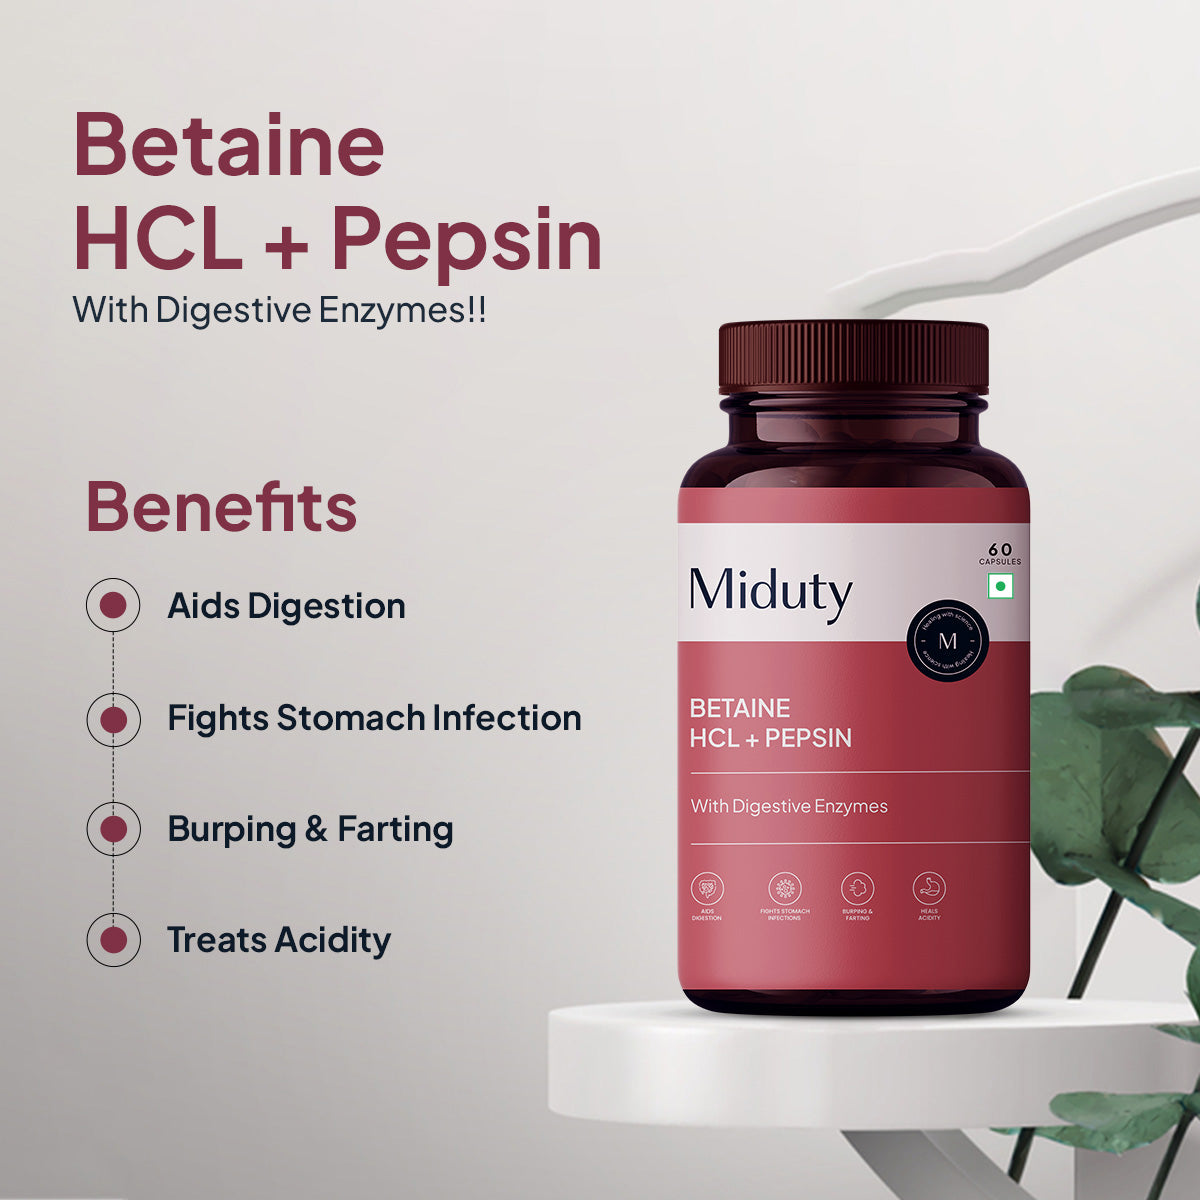 Betaine HCL+ Pepsin - Miduty